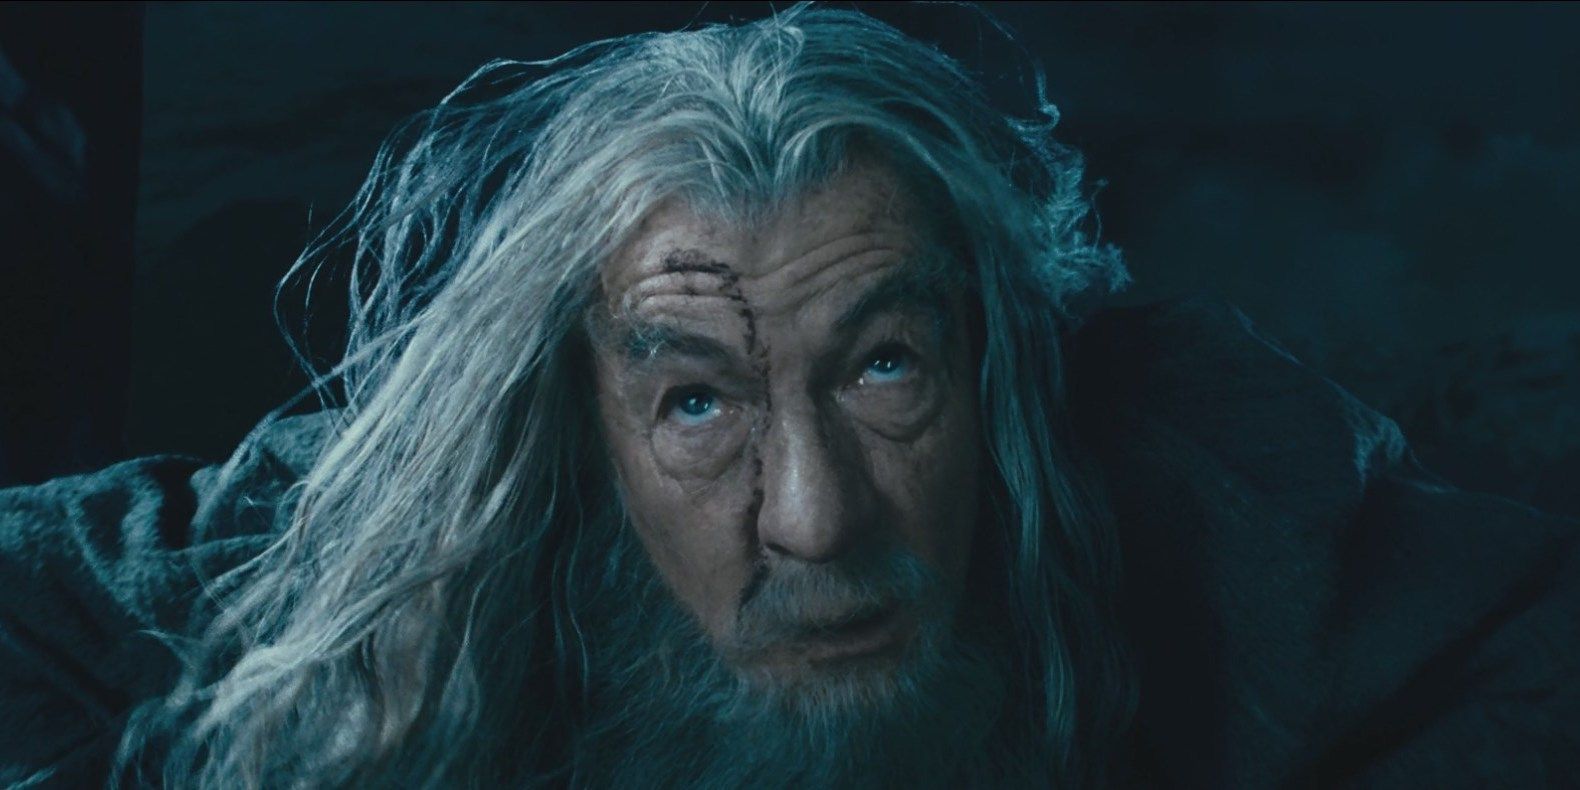 Gandalf looking up Saruman on the top of Isengaard tower in The Lord of the Rings The Fellowship of the Ring